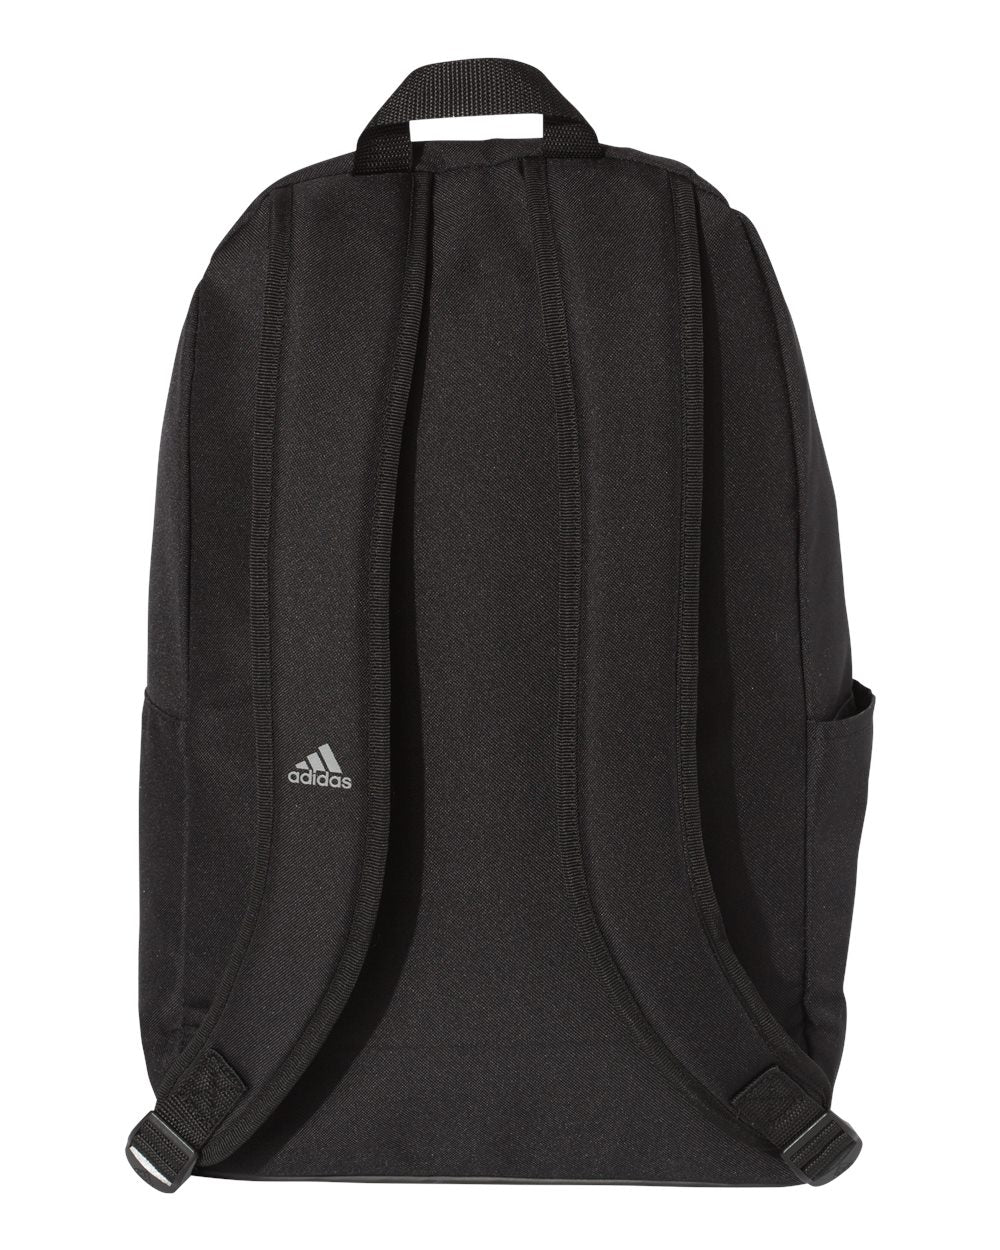 Cosmos 18L 3-Stripes Adidas Backpack - Redwolf Jersey Works